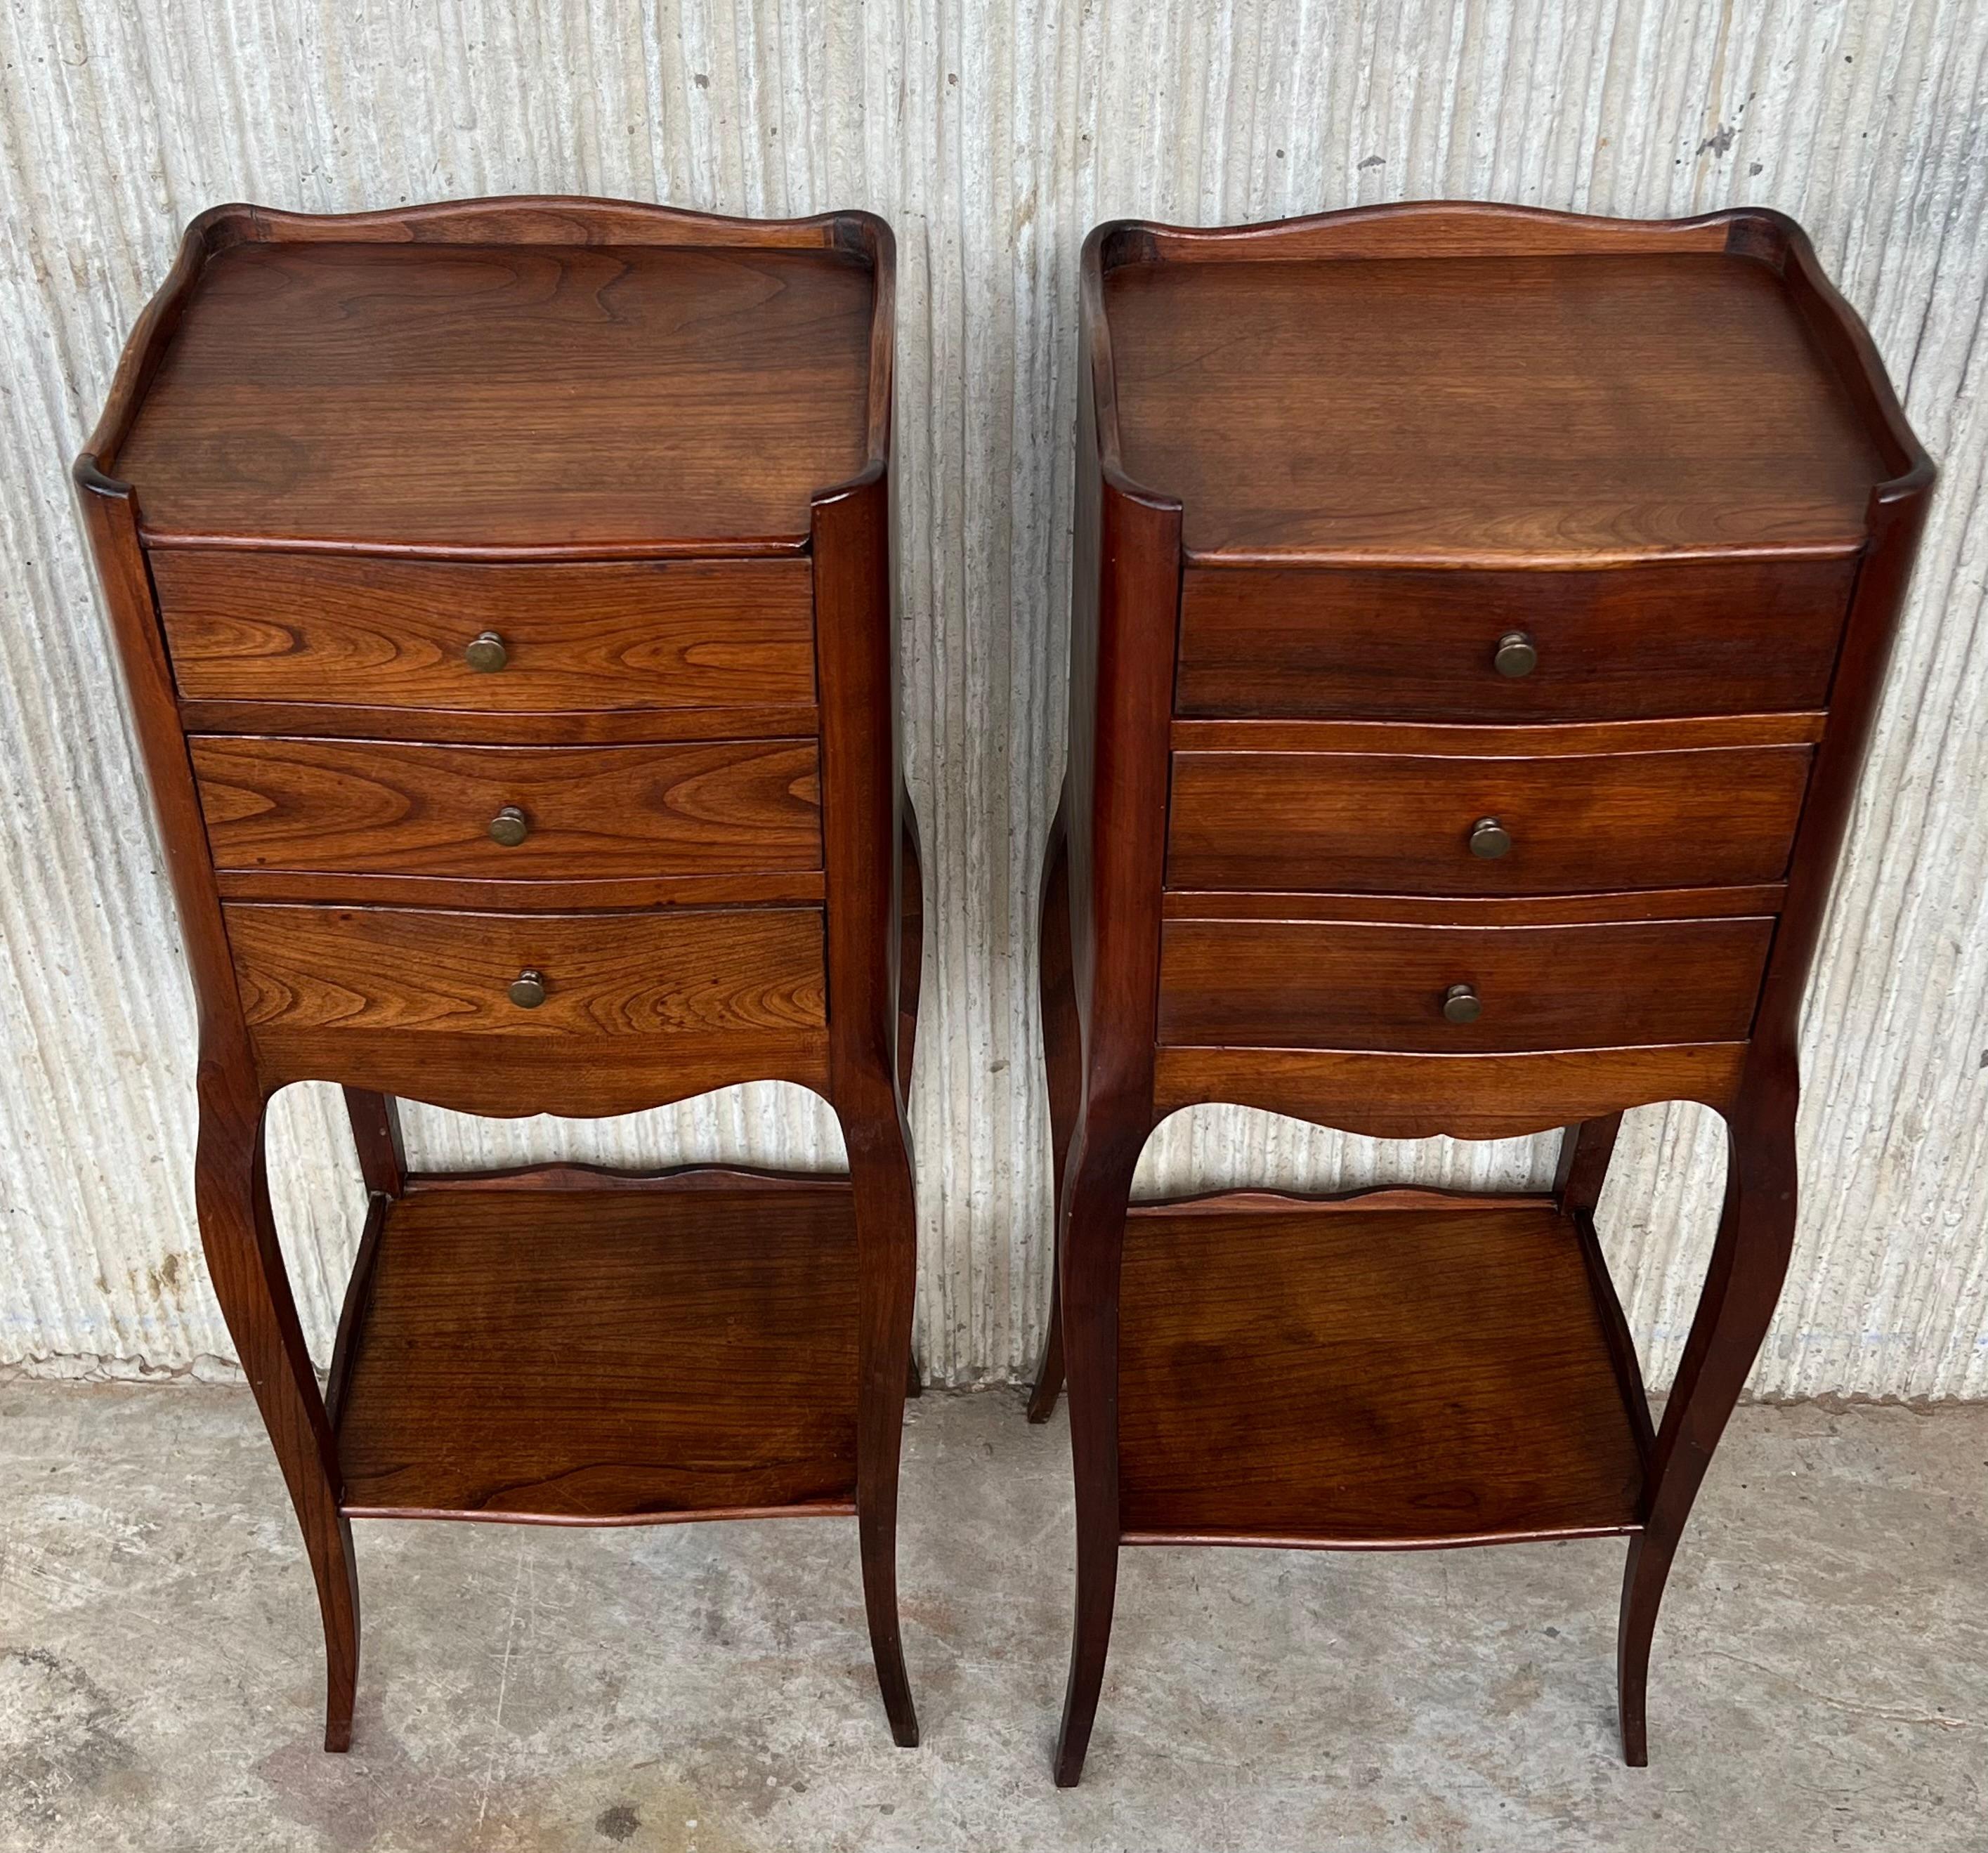 A pair of French Louis XV style walnut bedside tables from the early 20th century. This pair of French 'tables de chevet' was created in the early years of the 20th century, at a time when the country revisited the Rococo style that marked the reign